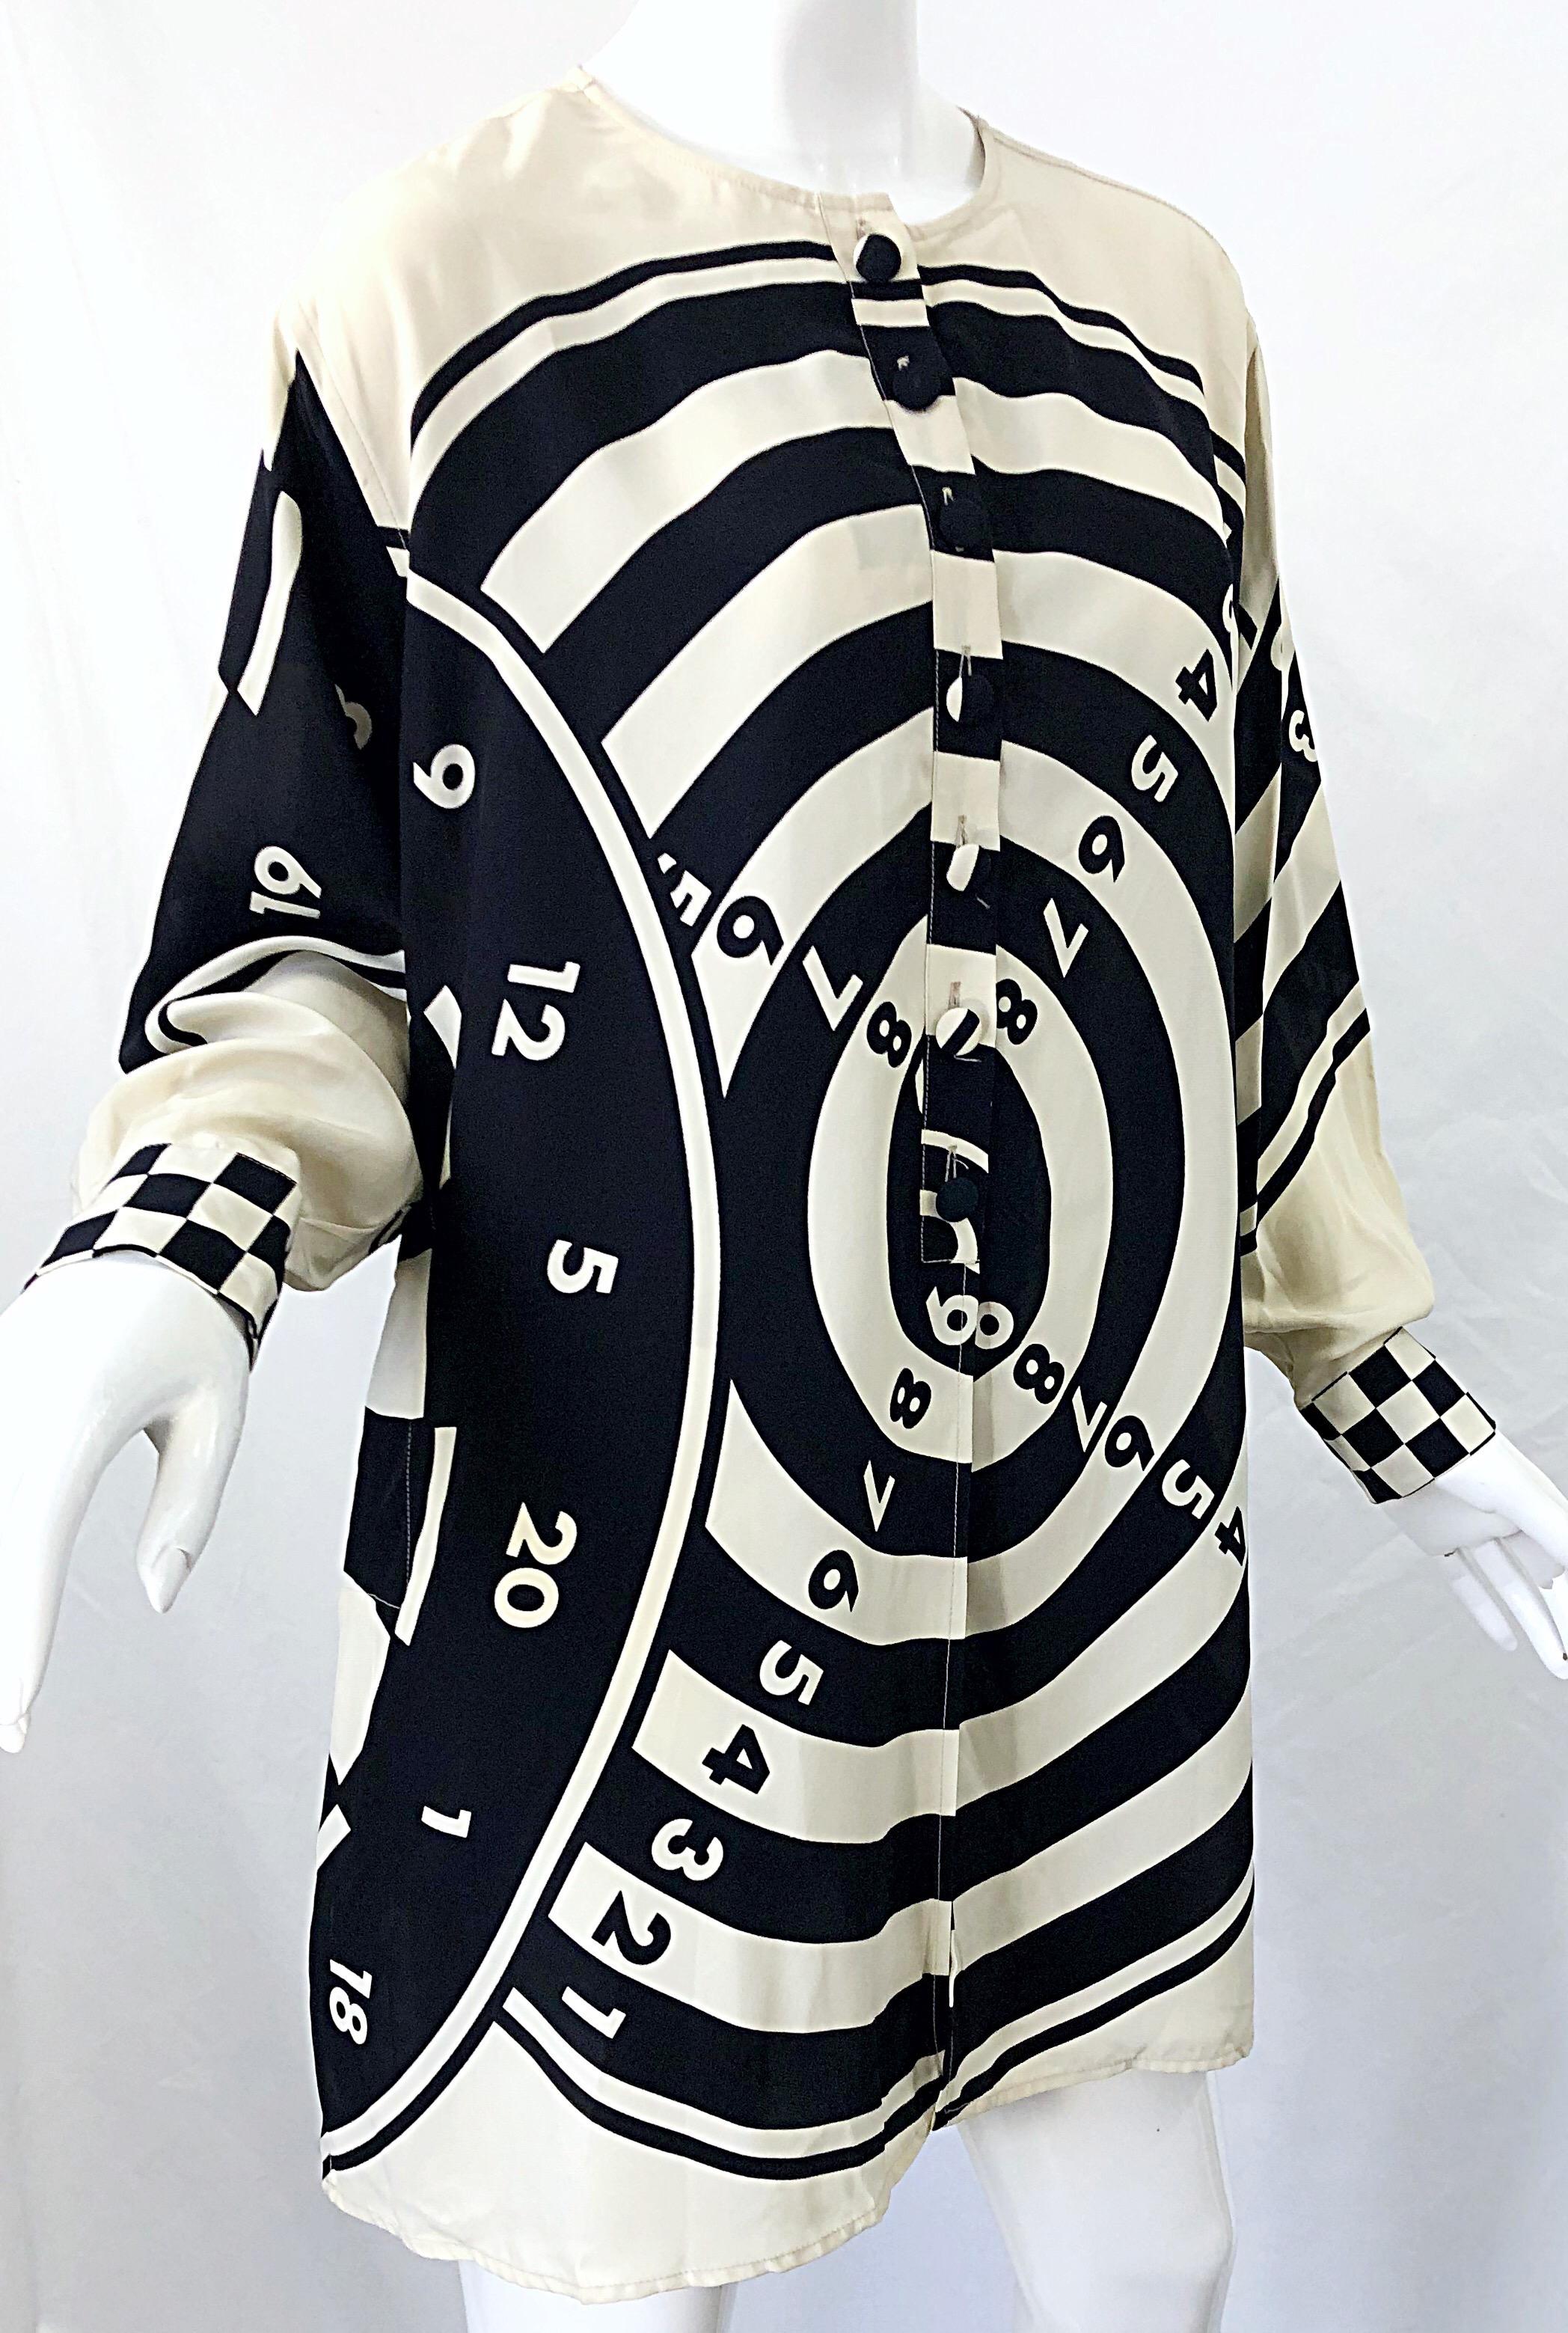 1980s Moschino Cheap & Chic Bullseye Black and White Size 8 Vintage Tunic Dress For Sale 4